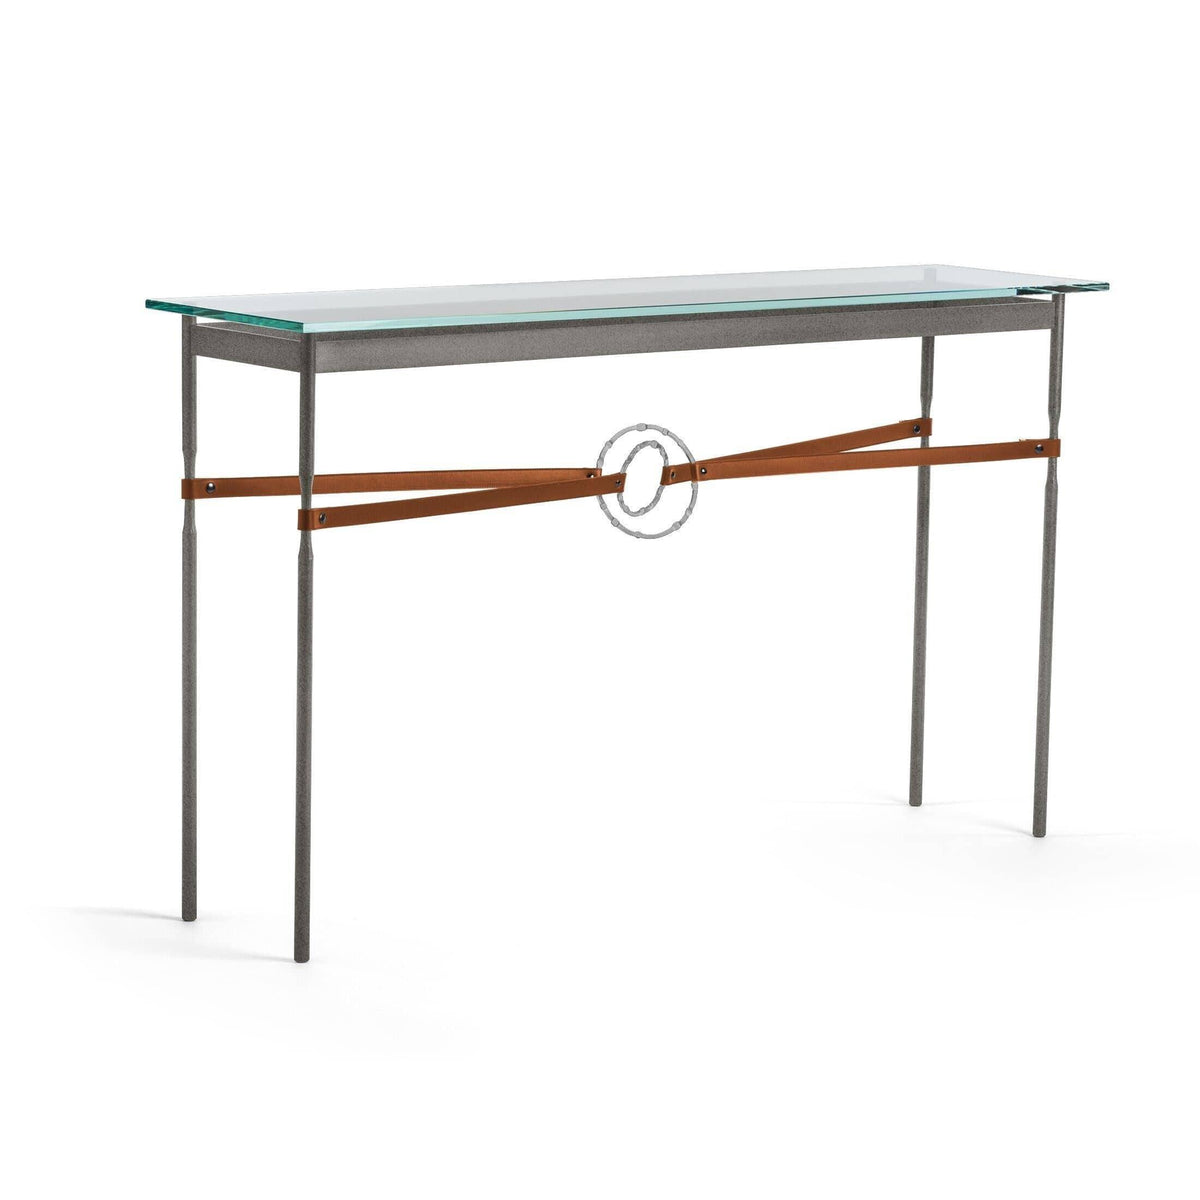 Hubbardton Forge - Equus Chestnut Leather Console Table - 750118-20-82-LC-VA0714 | Montreal Lighting & Hardware